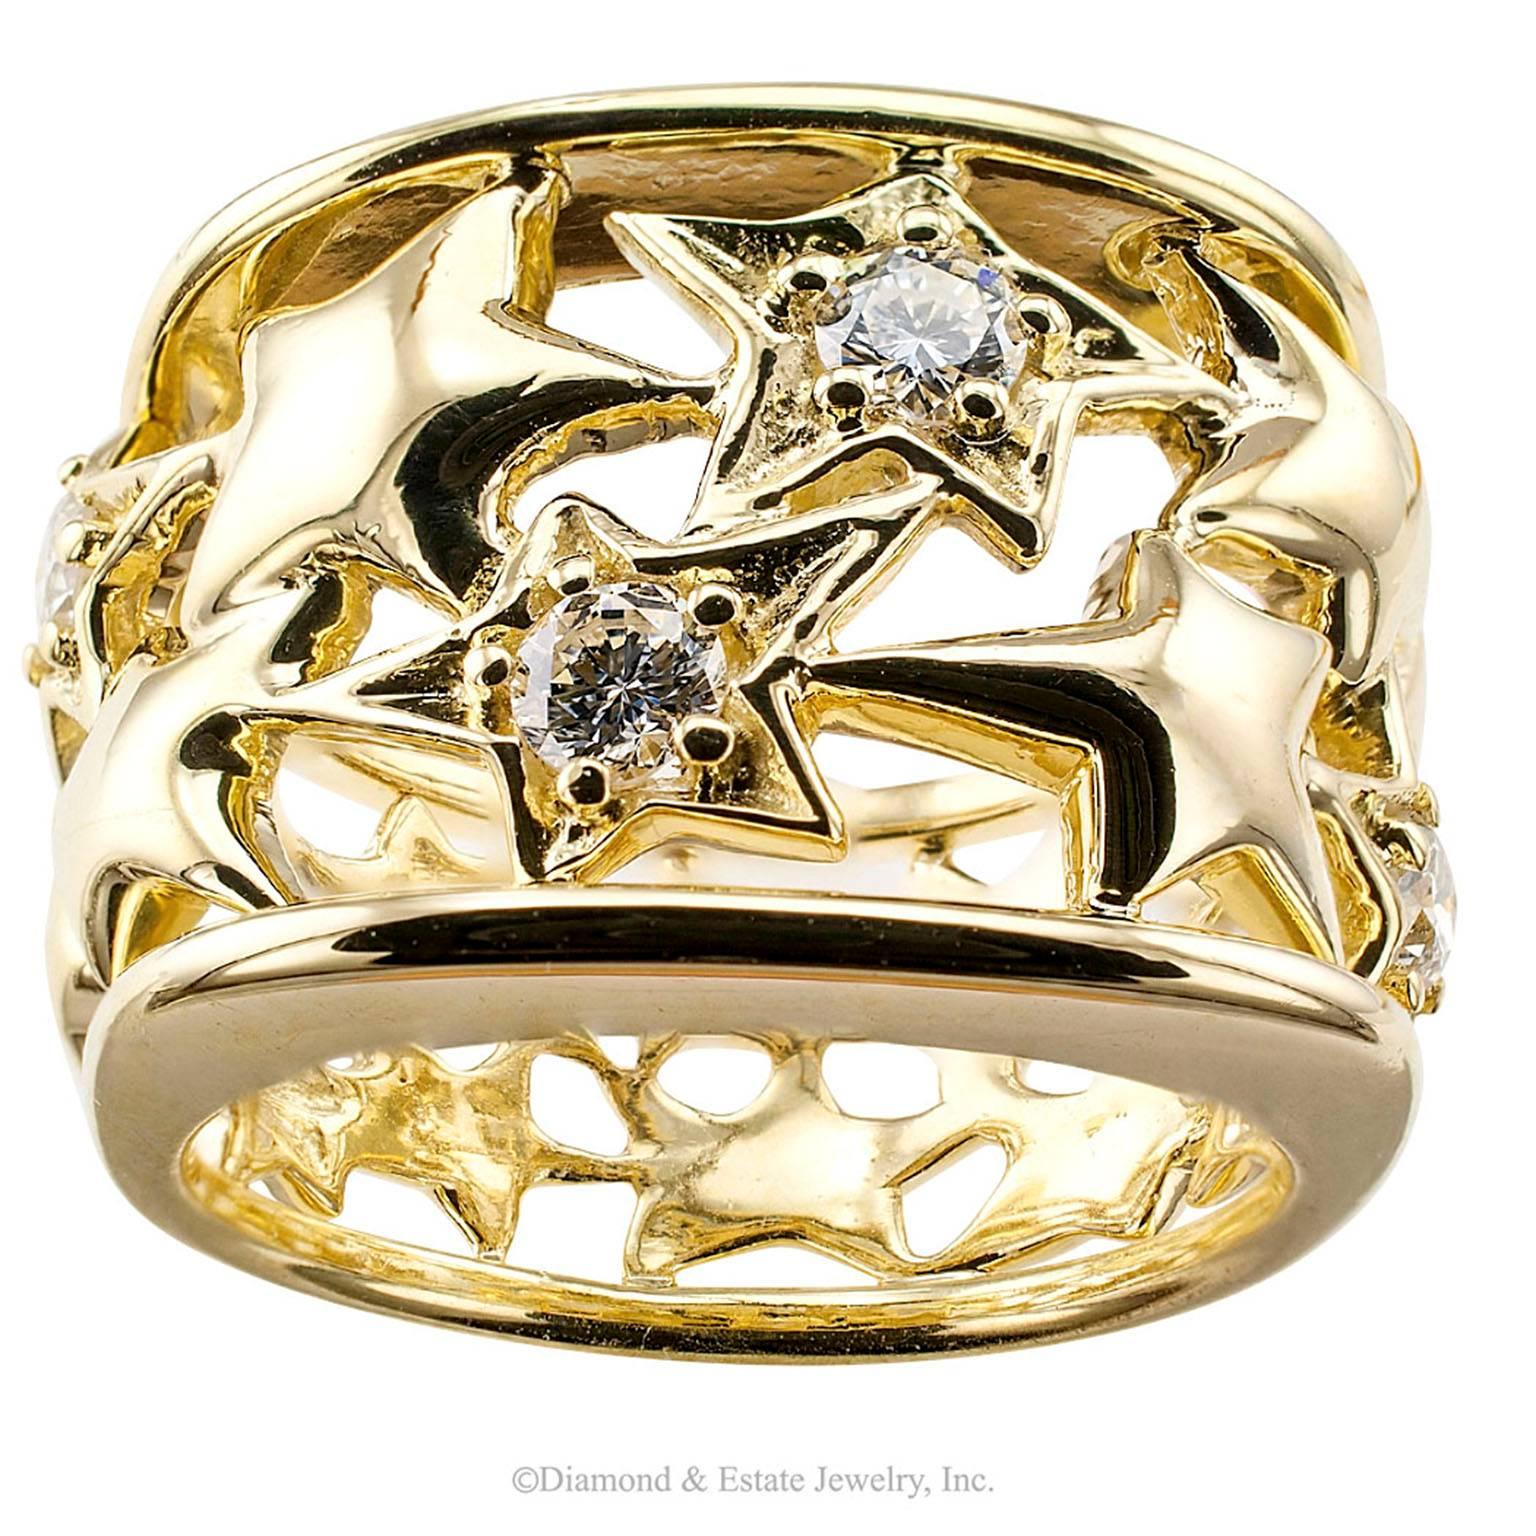 Jose Hess Diamond Gold Wide Ring Band

Jose Hess 1990s star ring band with diamonds and 18-karat gold.  If you want to wrap the stars around your finger, here is your opportunity.  This stylish 18-karat yellow gold wide ring band features a pierced